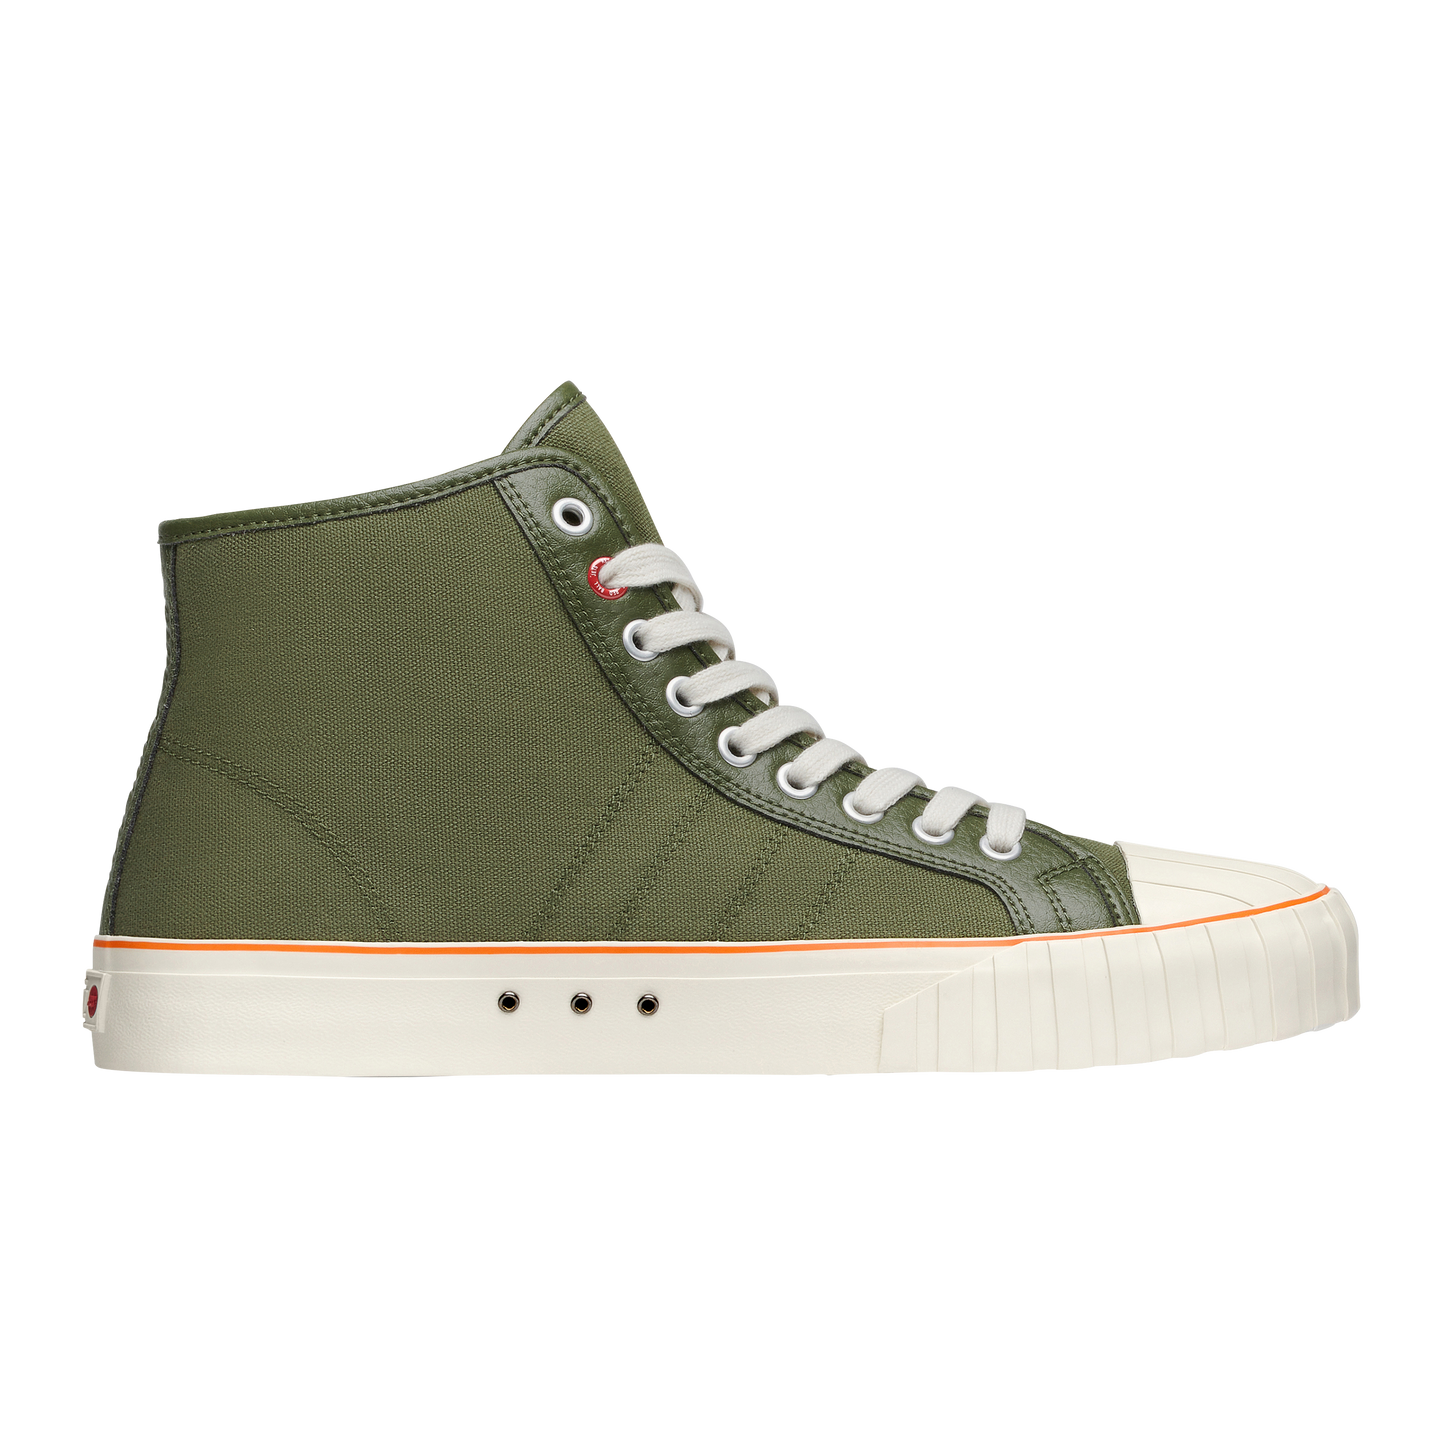 alternate side view of the olive 51 hi